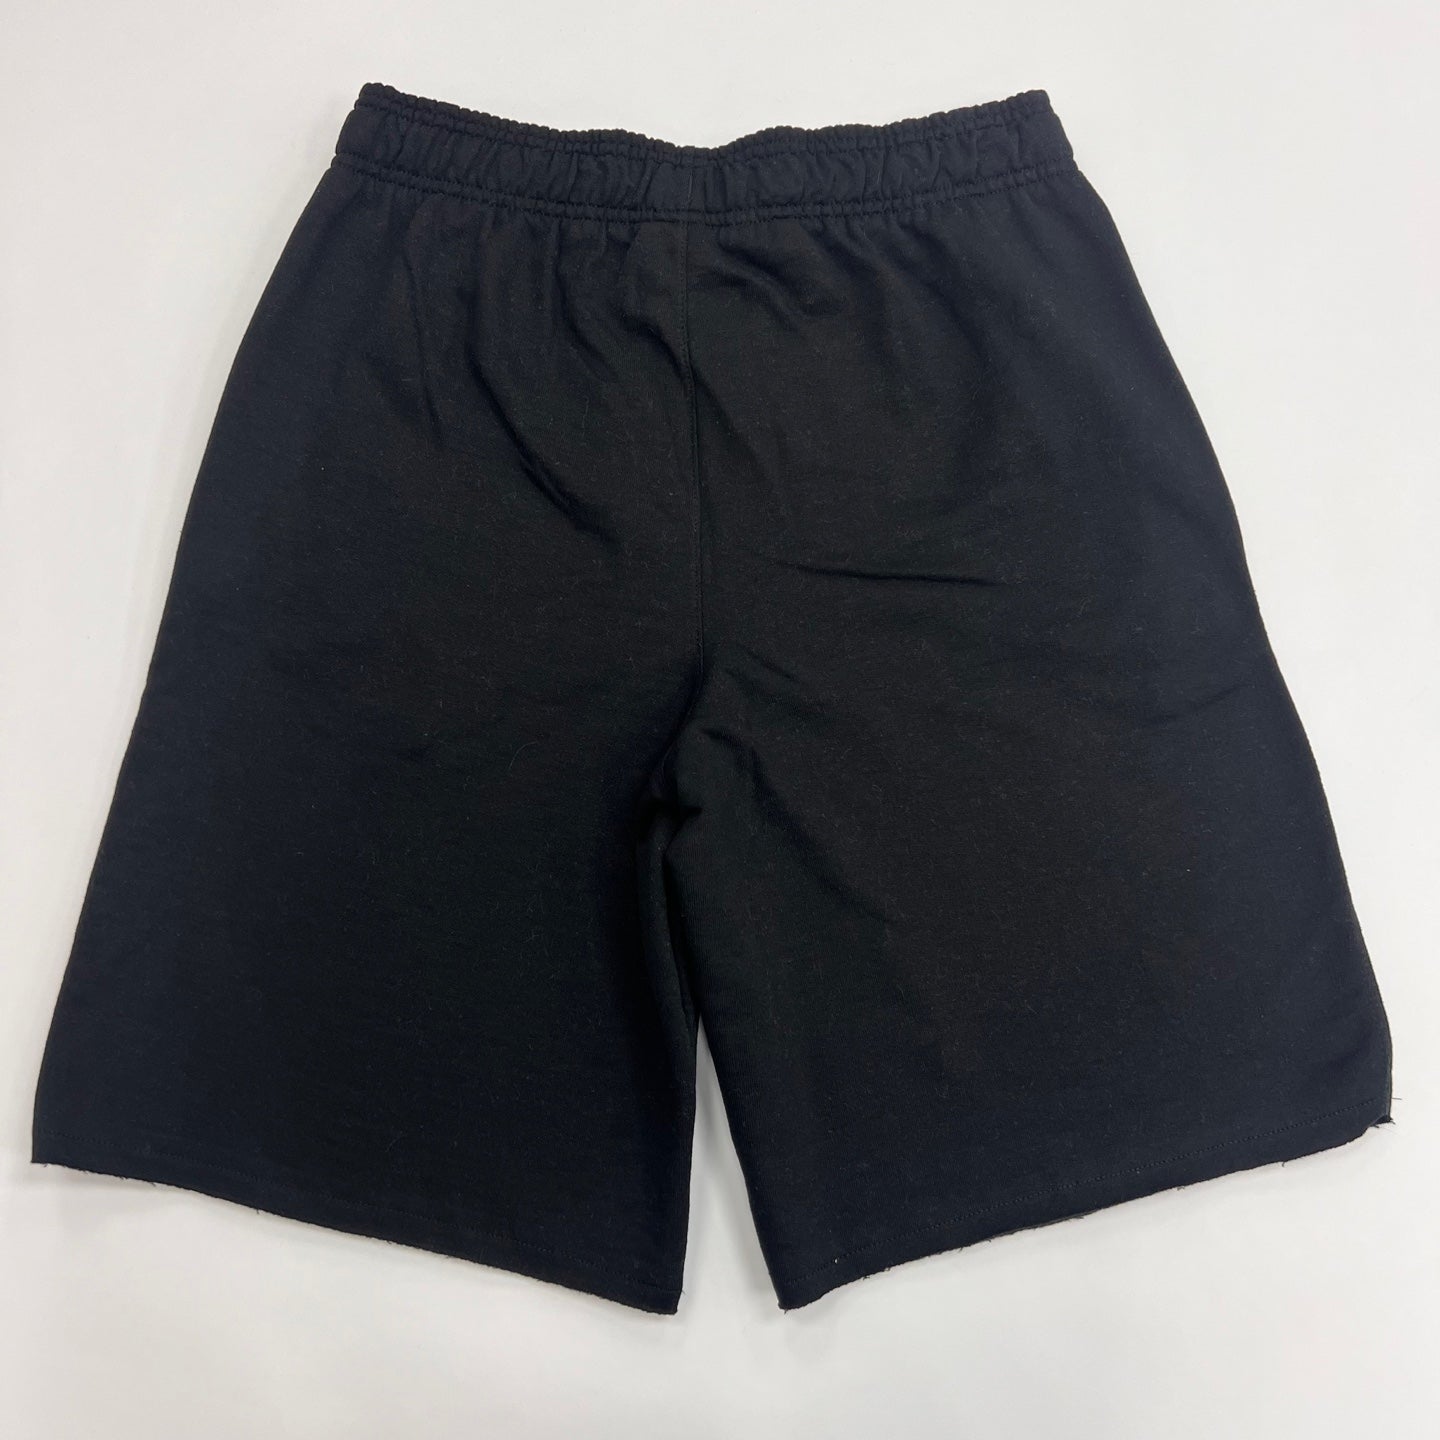 Champion Powerblend Fleece Shorts - 10 Inches